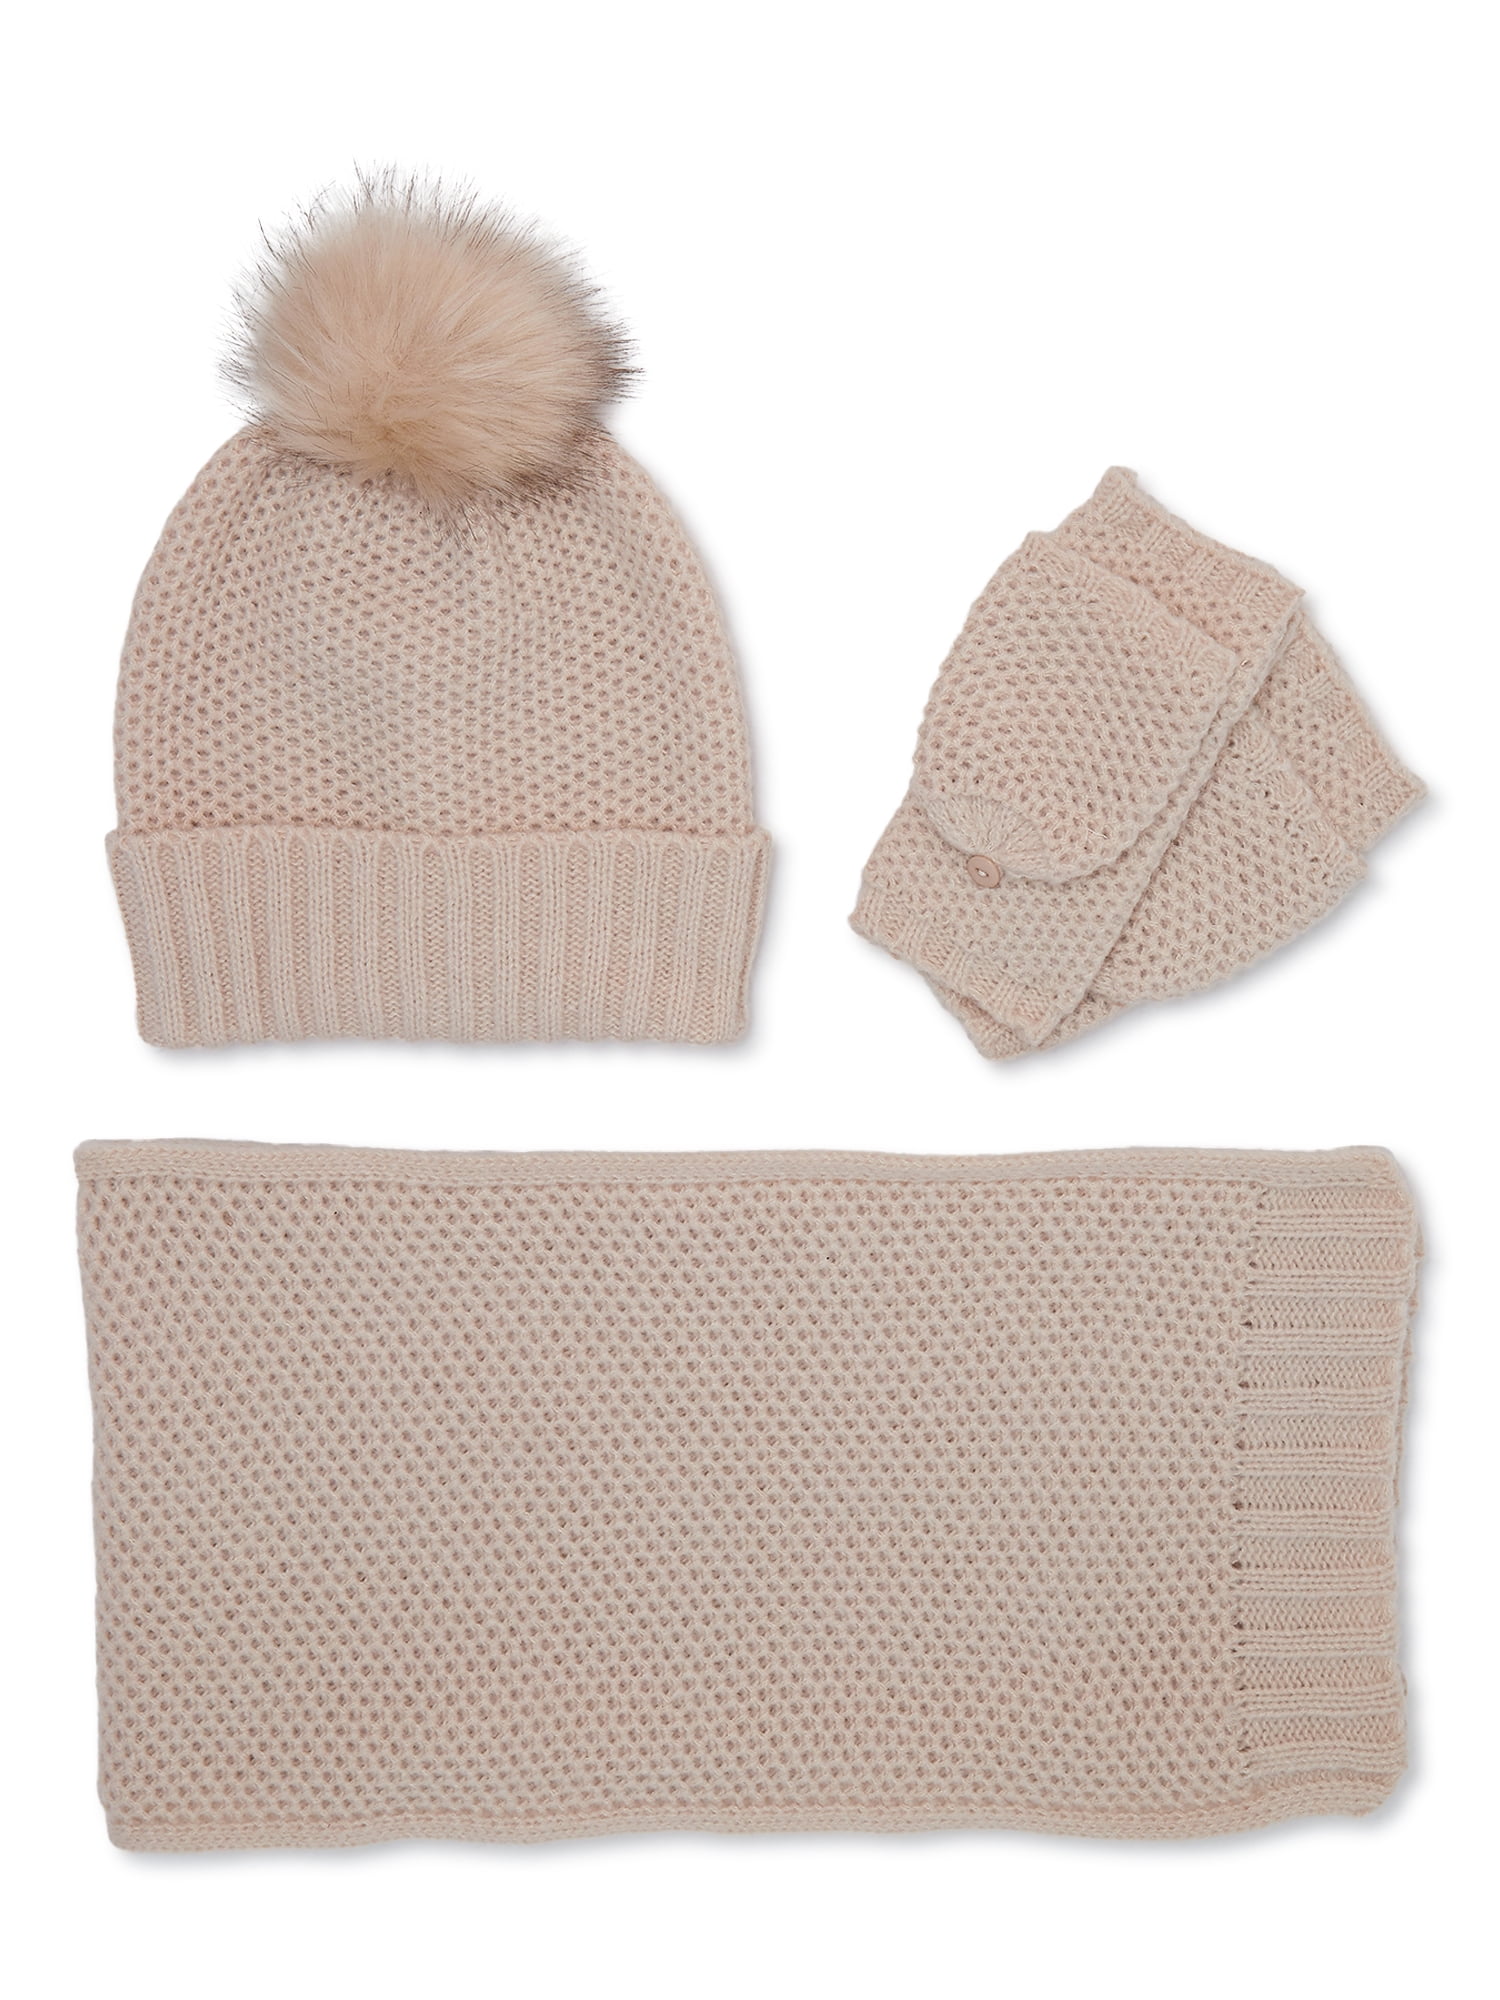 21 Extremely Toasty Hats, Gloves, and Scarves to Help You Bundle Up on A  Budget